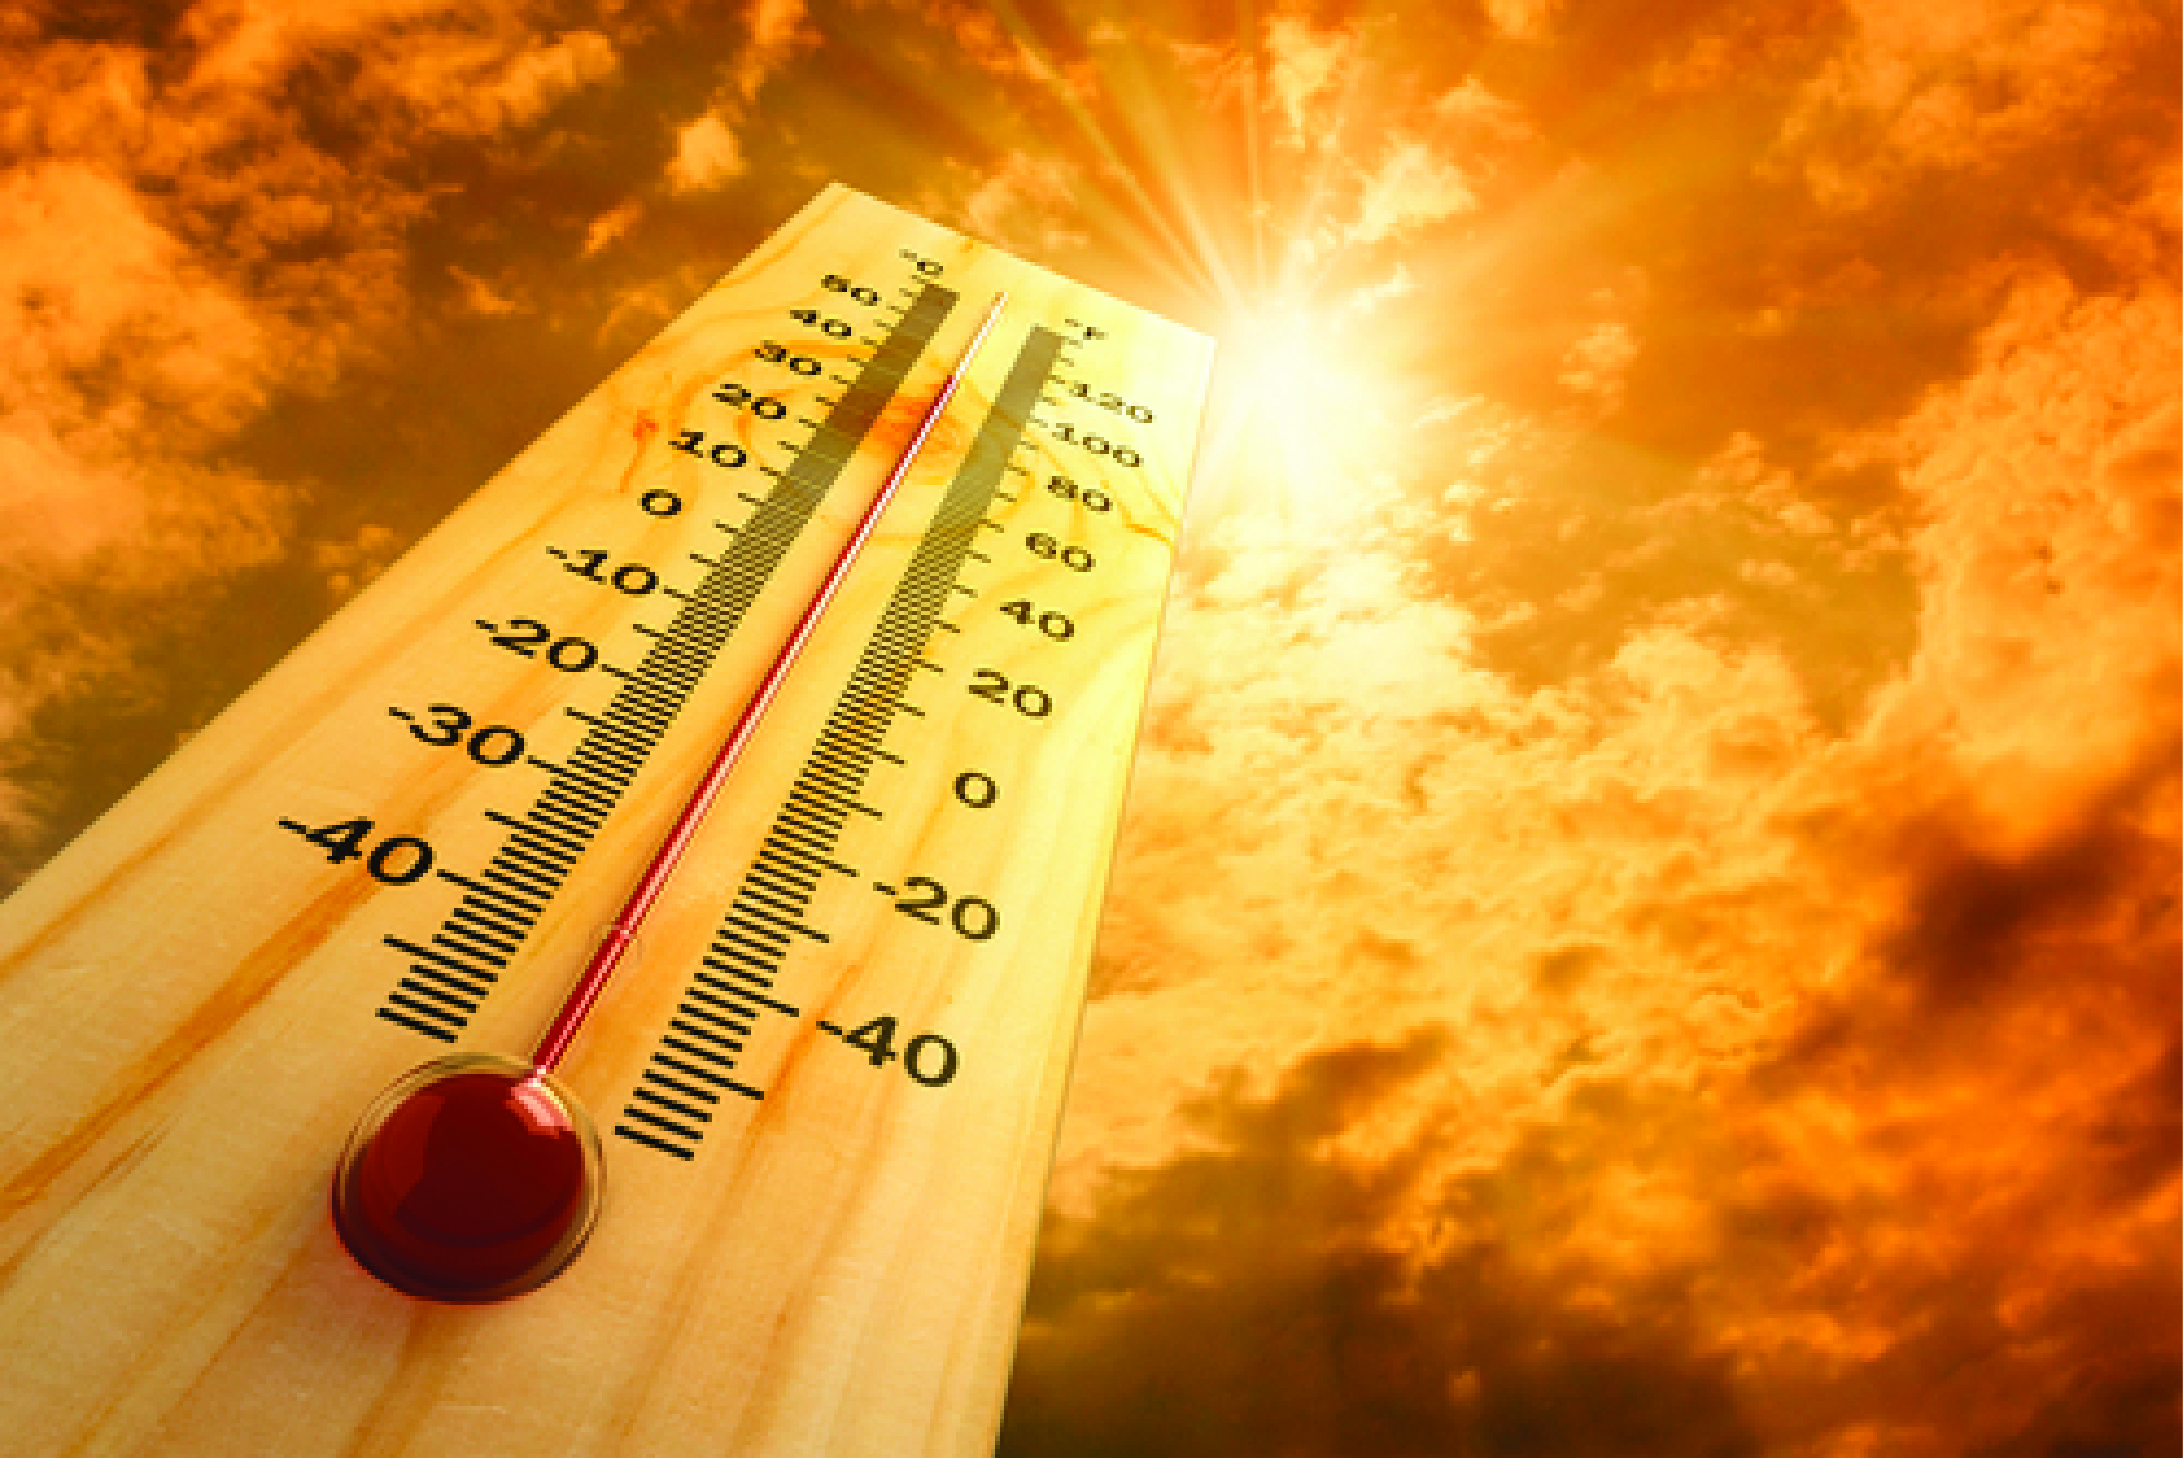 Rising temperatures expose more employees to dangerous working conditions